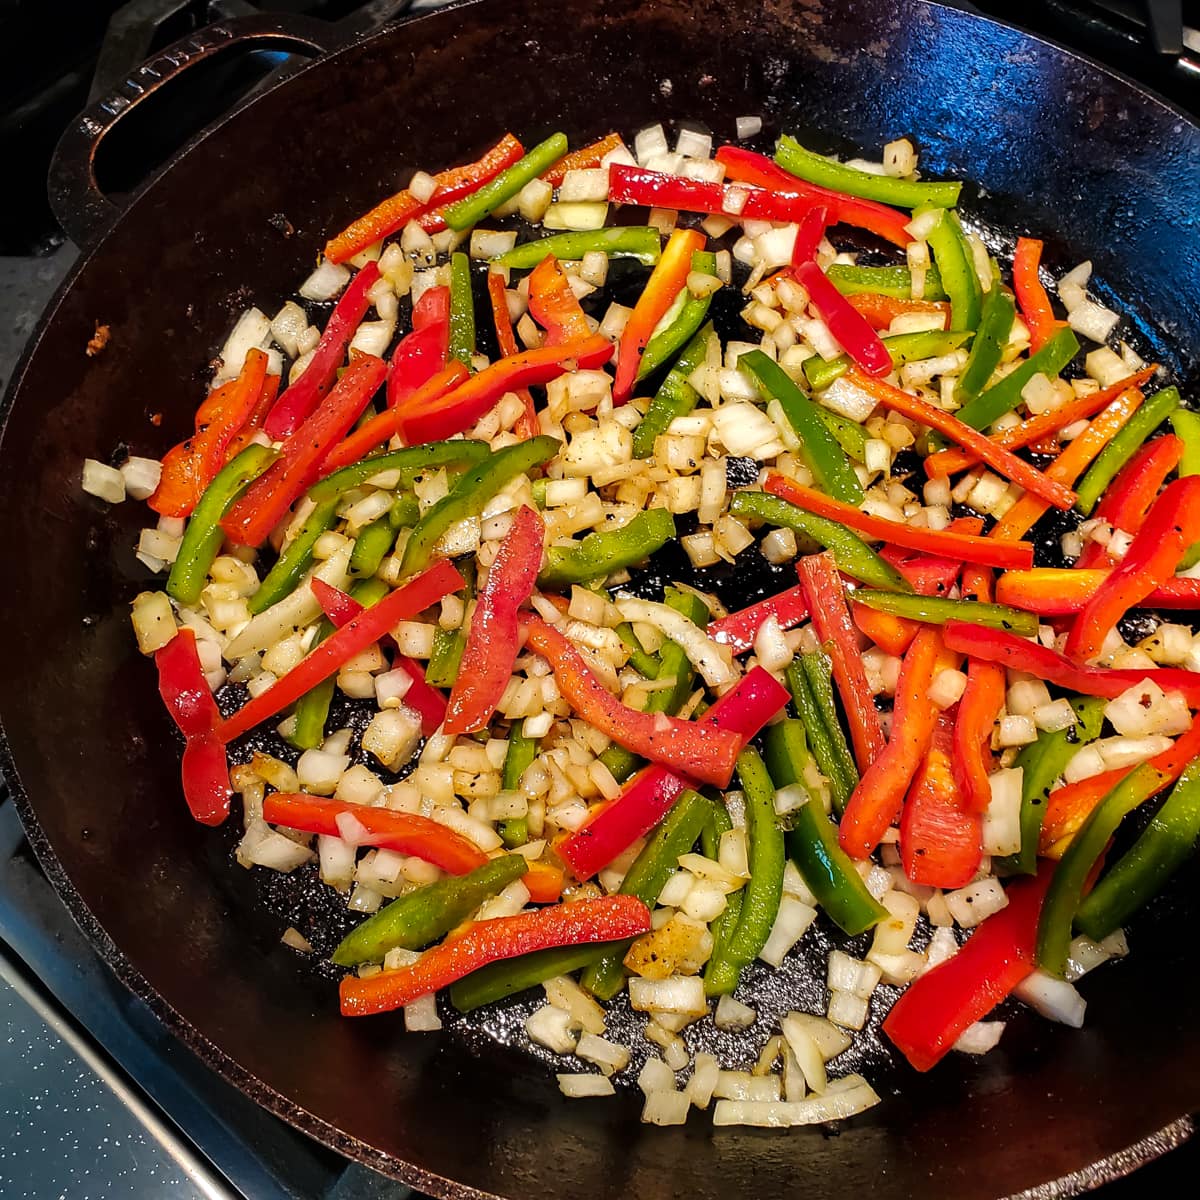 Veggies cooking in a cast iron skillet.